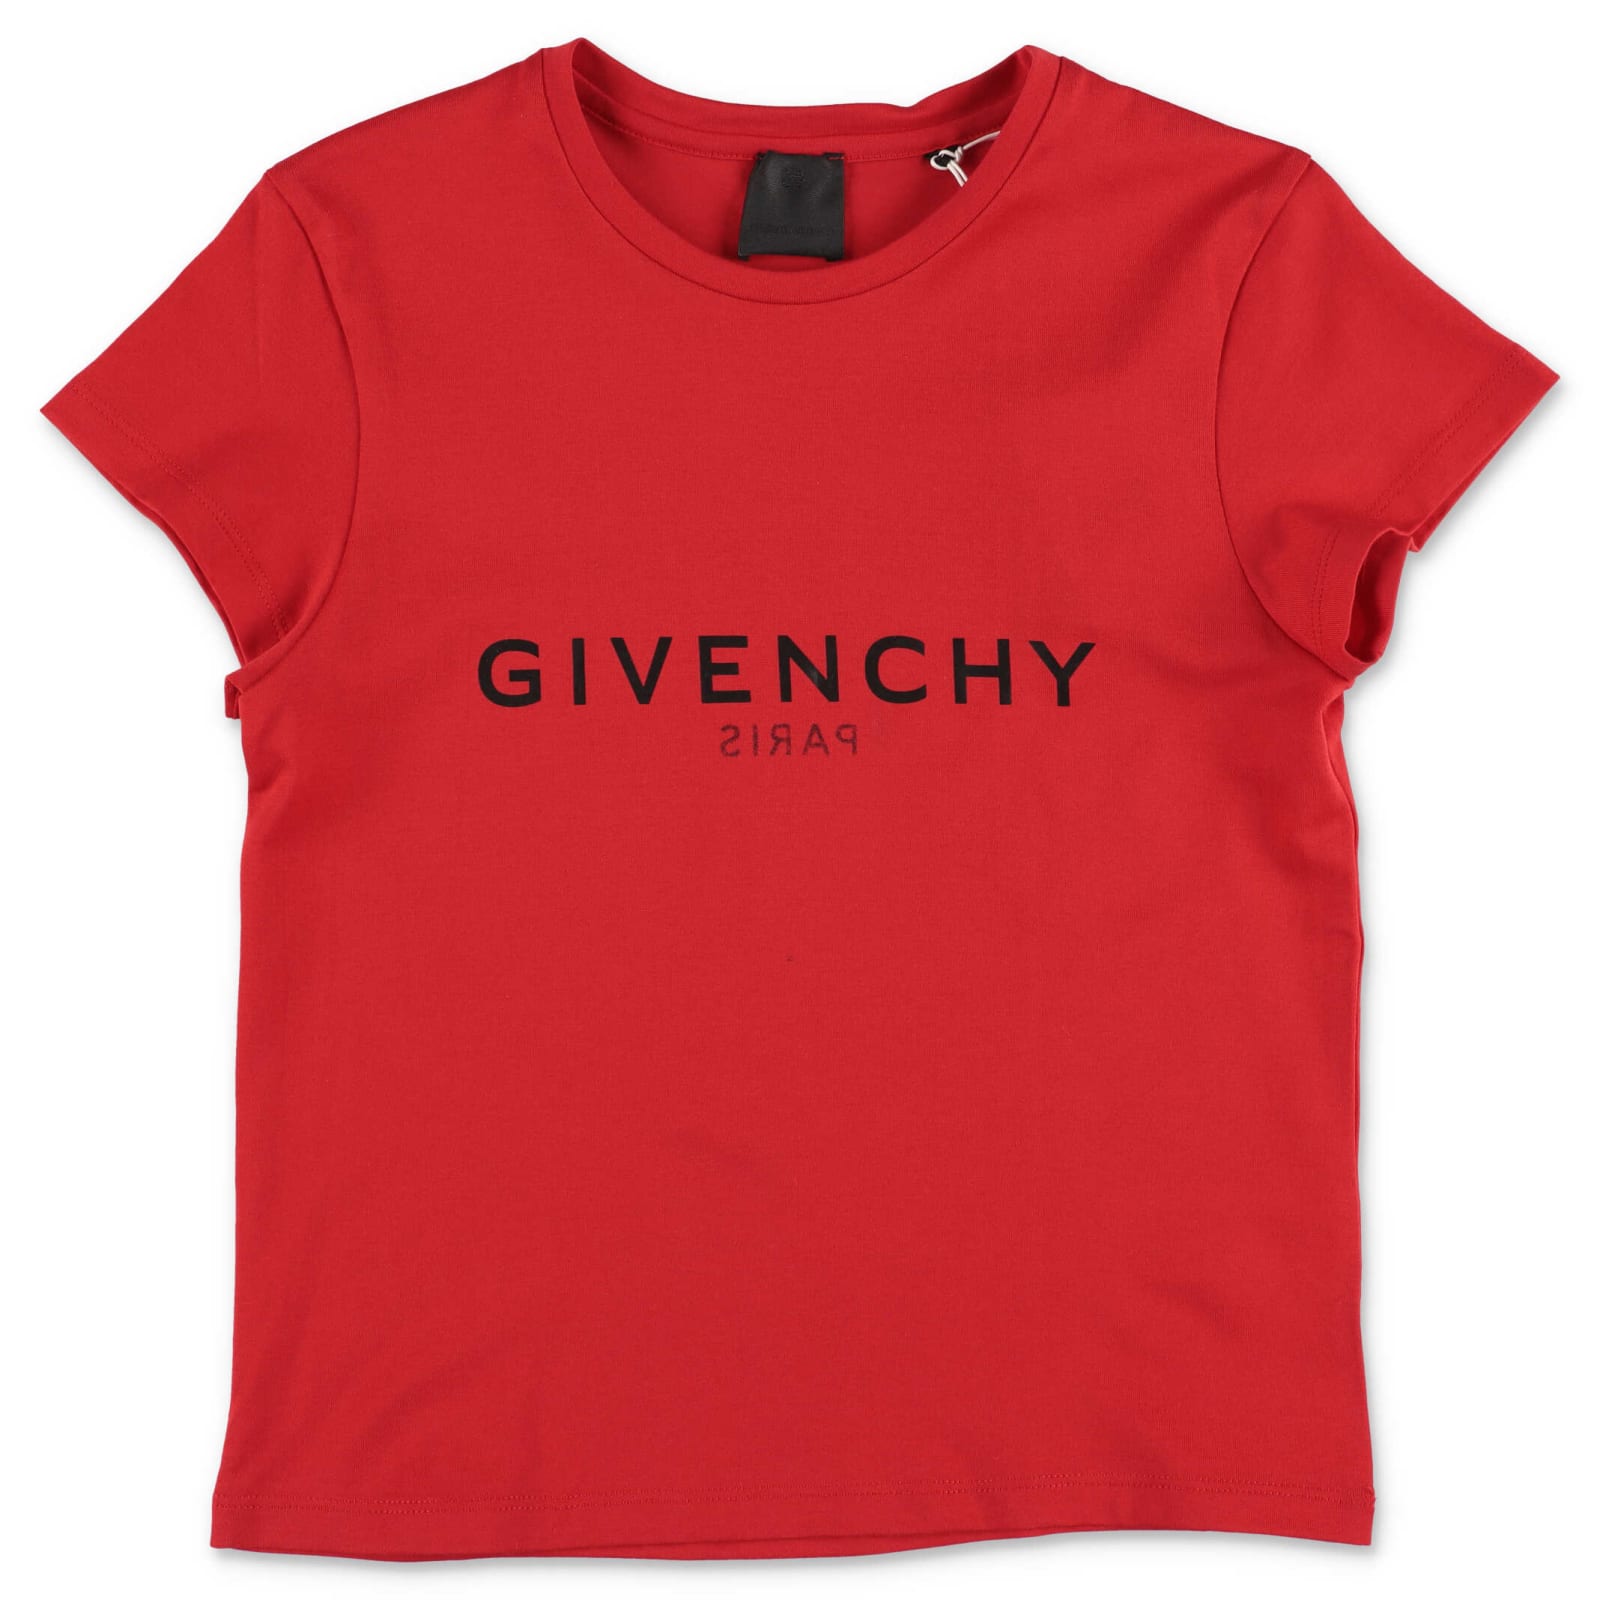 Givenchy T-shirt Rossa In Jersey Di Cotone